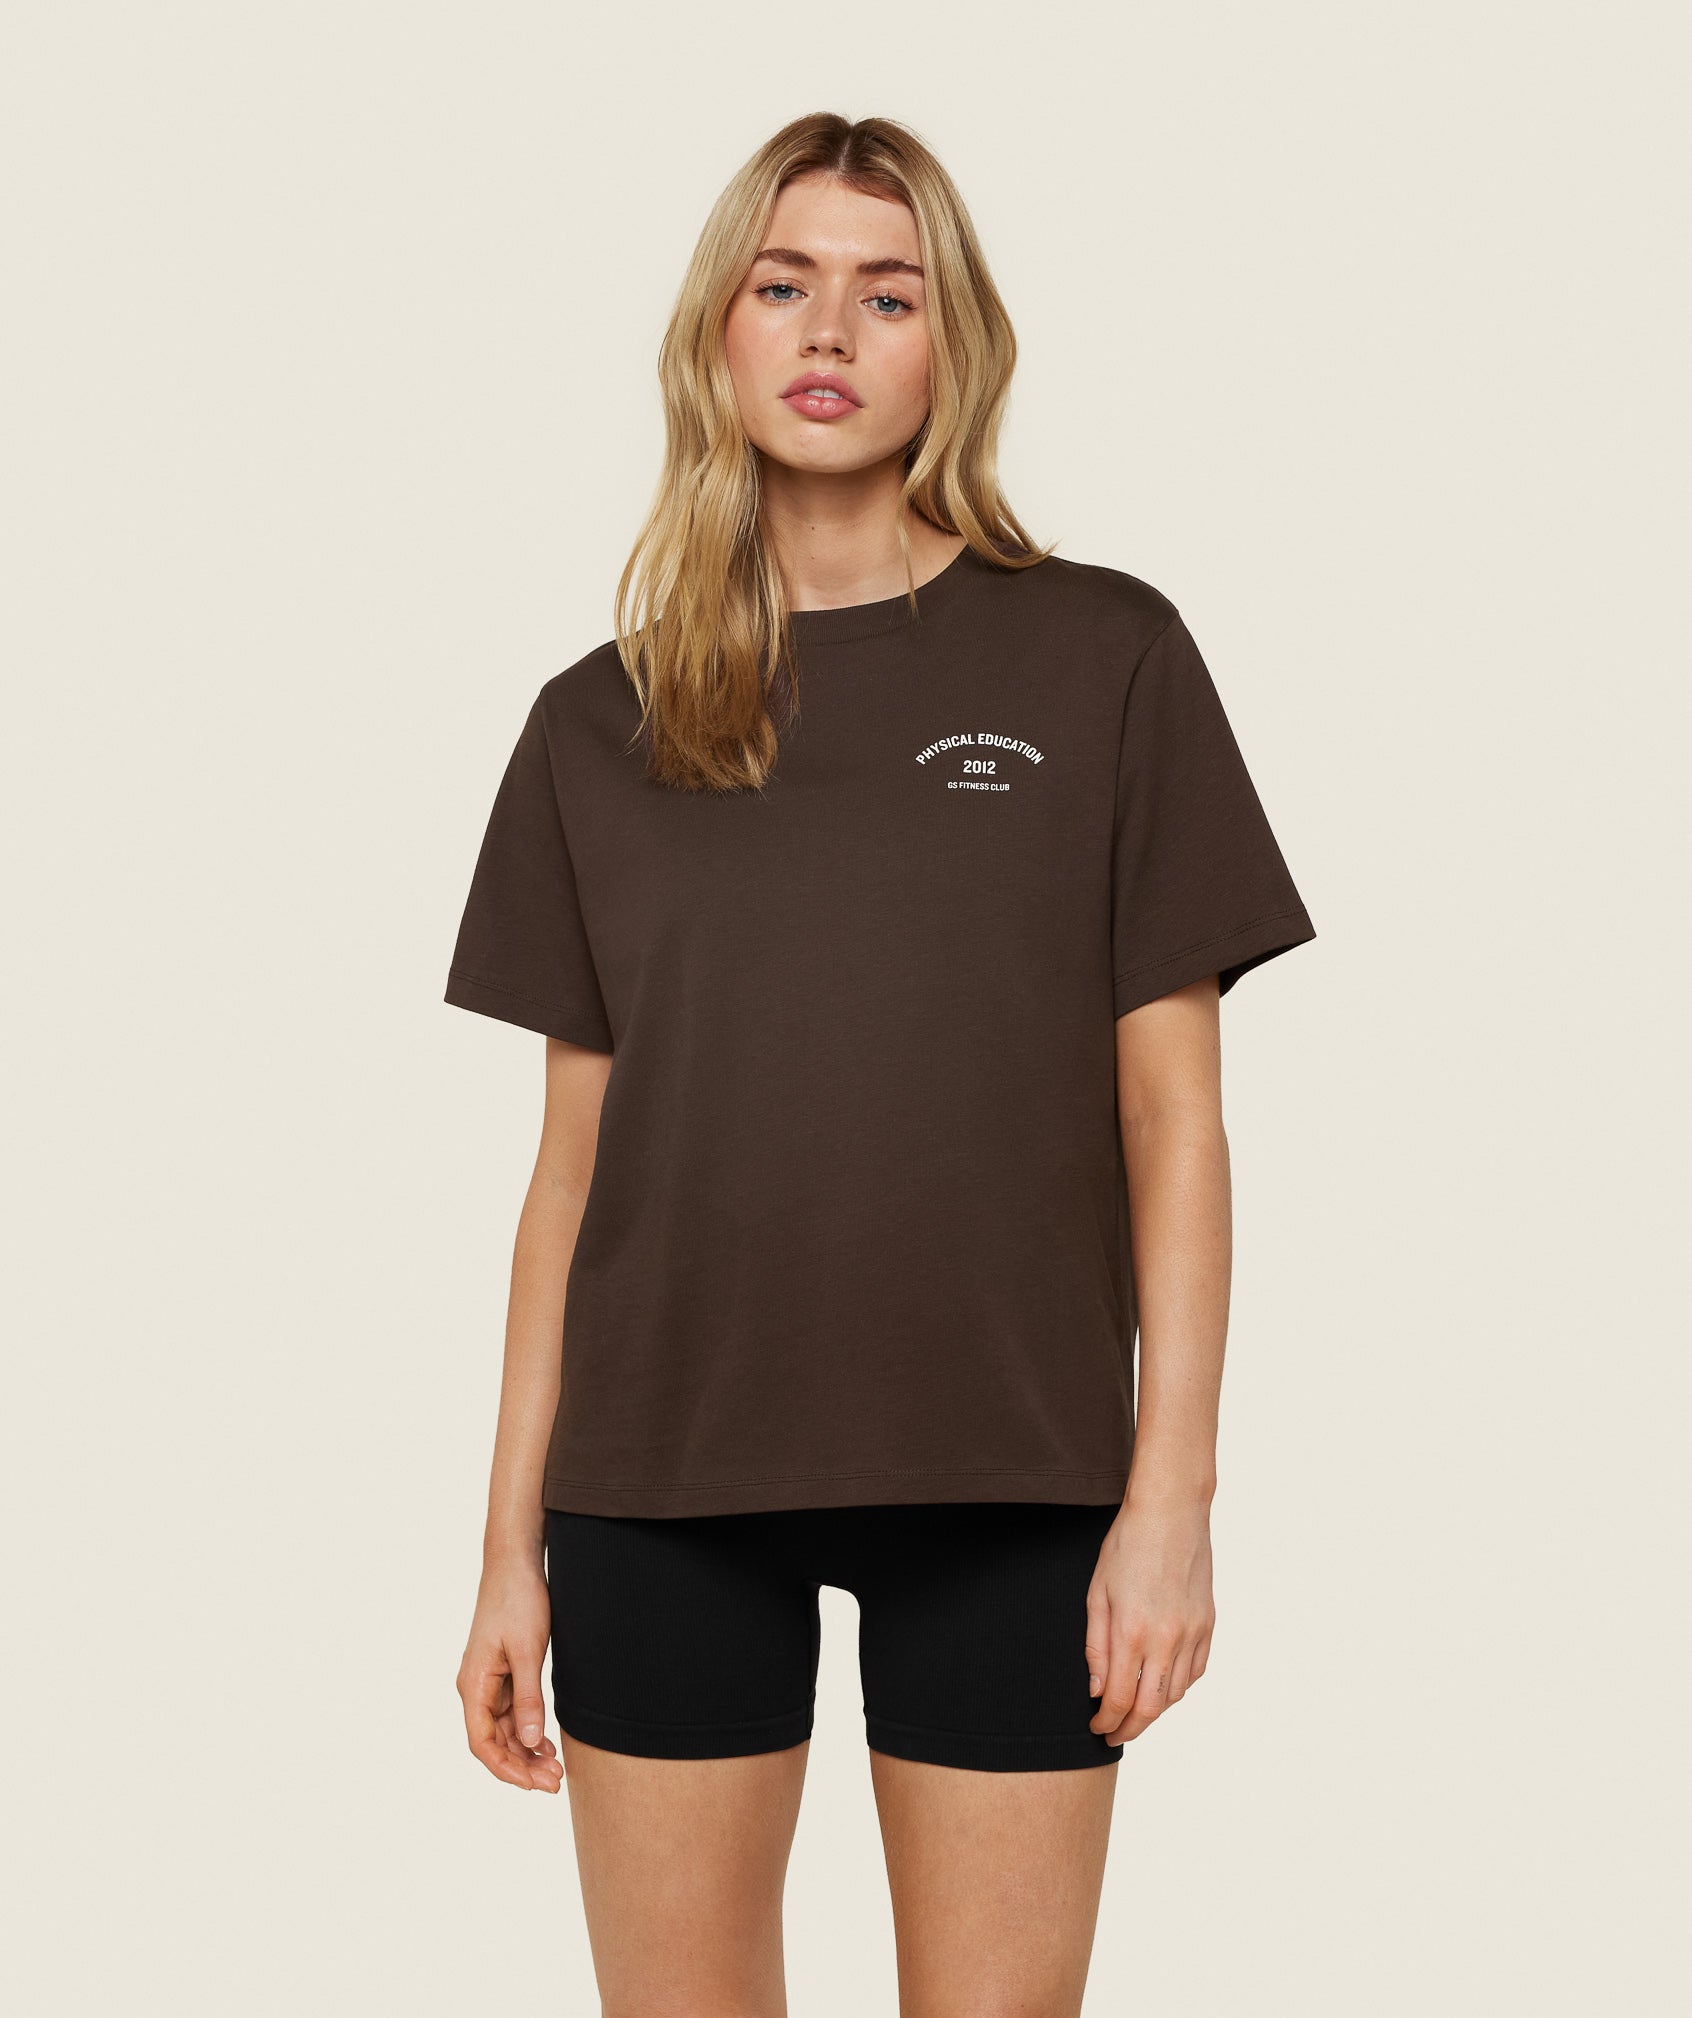 Phys Ed Graphic T-Shirt in Archive Brown